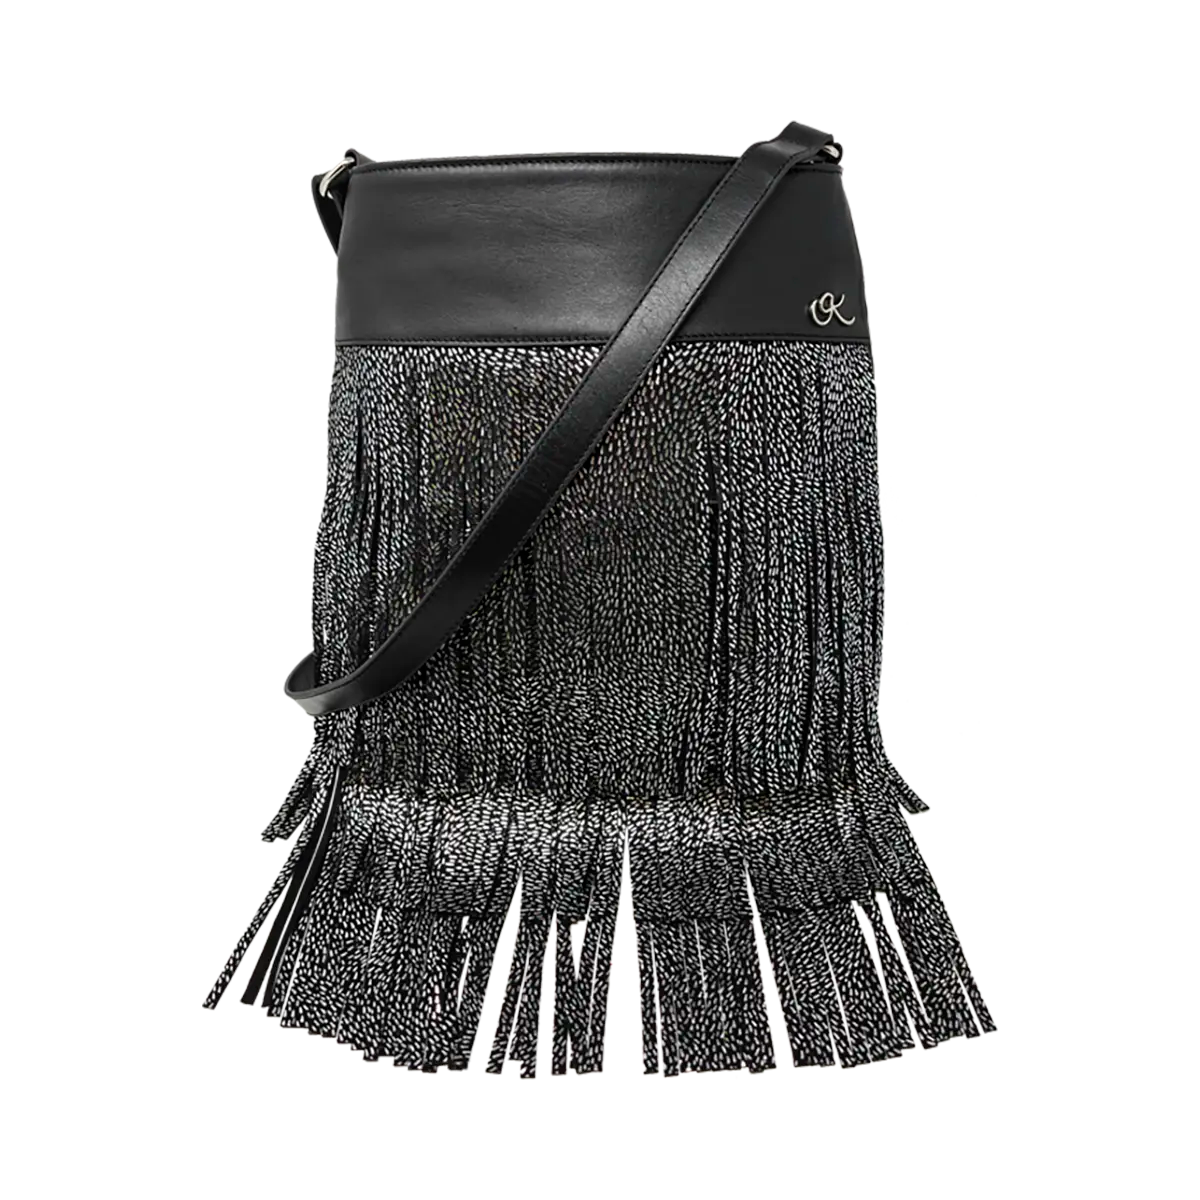 black silver stripe leather shoulder bag with 3 layers of fringe. Fashion accessories, for women in San Diego, CA.